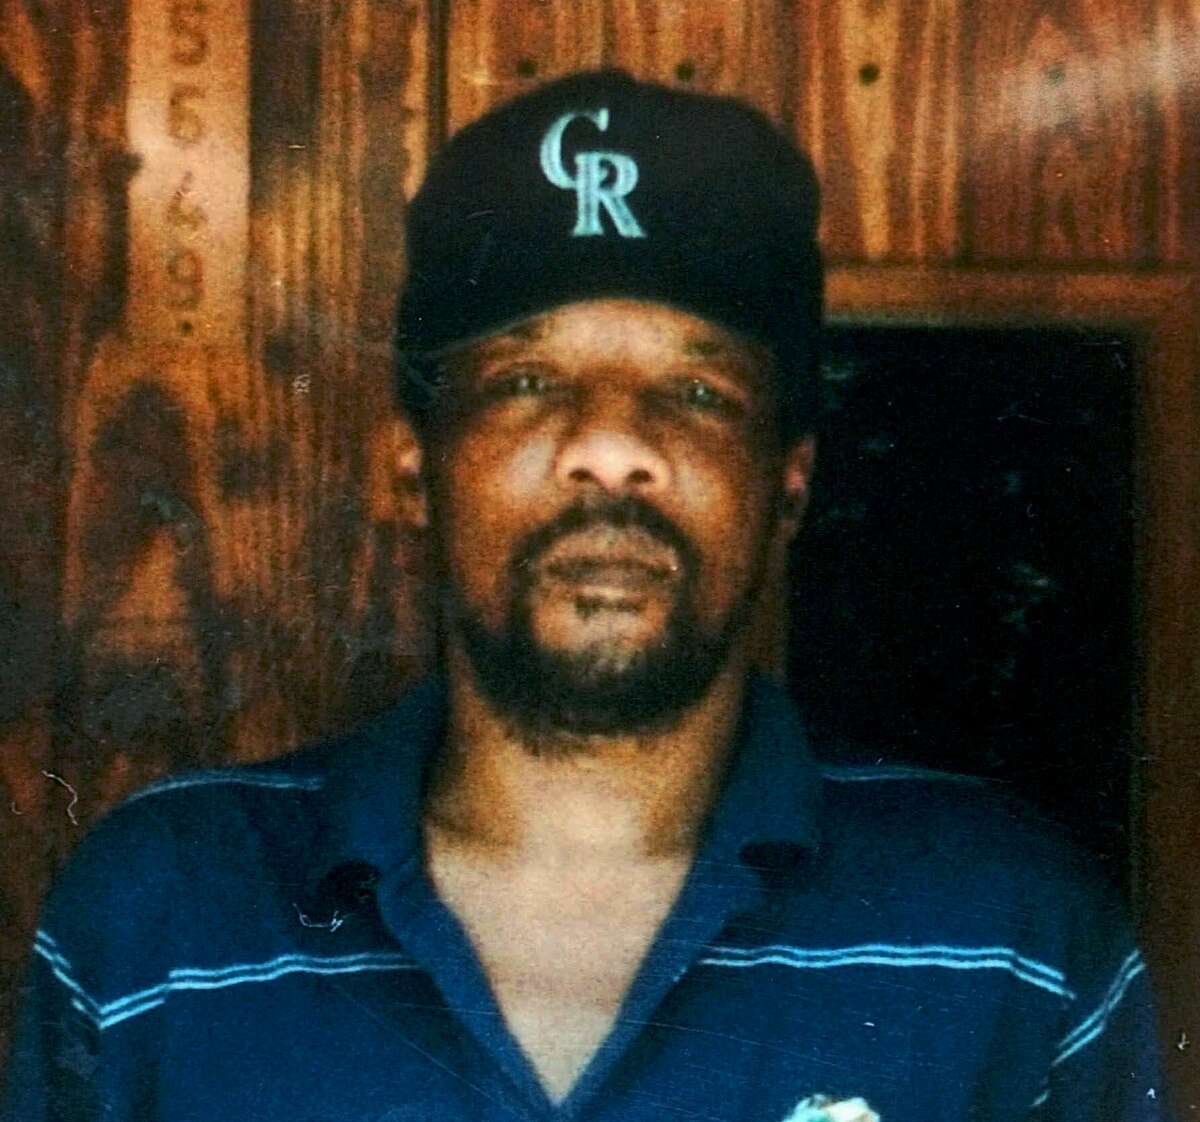 FILE--James Byrd Jr. is shown in this 1997 file photo. Byrd was tied to a truck and dragged to his death along a rural East Texas road on June 7, 1998, near Jasper, Texas. John William King, a 24-year-old unemployed laborer, was one of three white men charged in the crime. King went on trial Tuesday, Feb. 16, 1999 on murder charges in the gruesome death of Byrd. (AP Photo/Byrd Family Photo, File), Also appeared 1/22/03